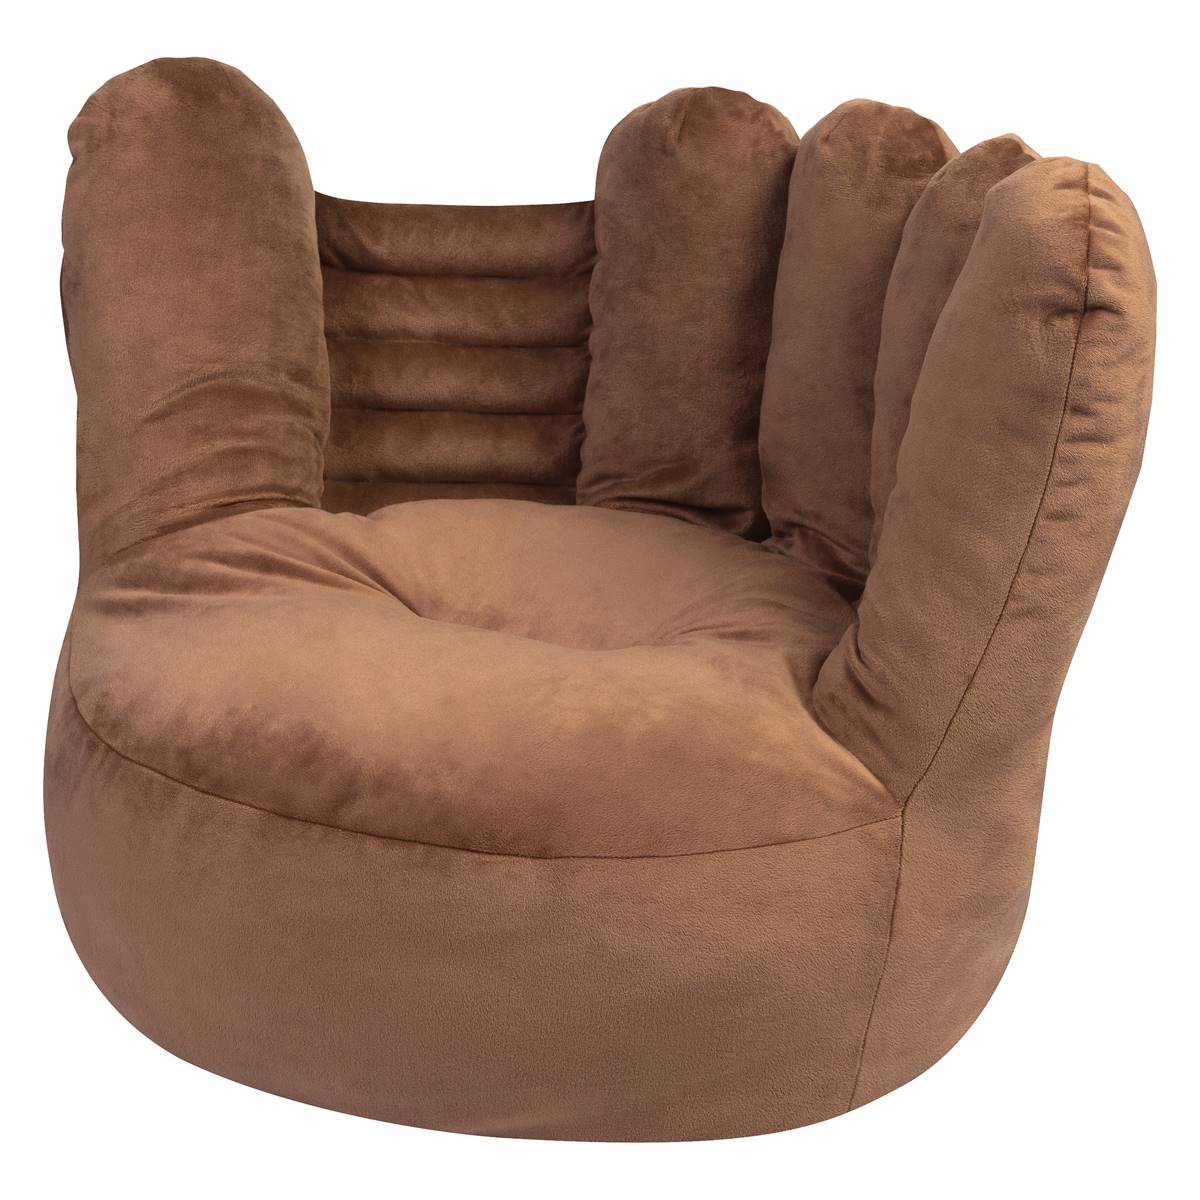 Trend Lab(R) Plush Glove Character Chair